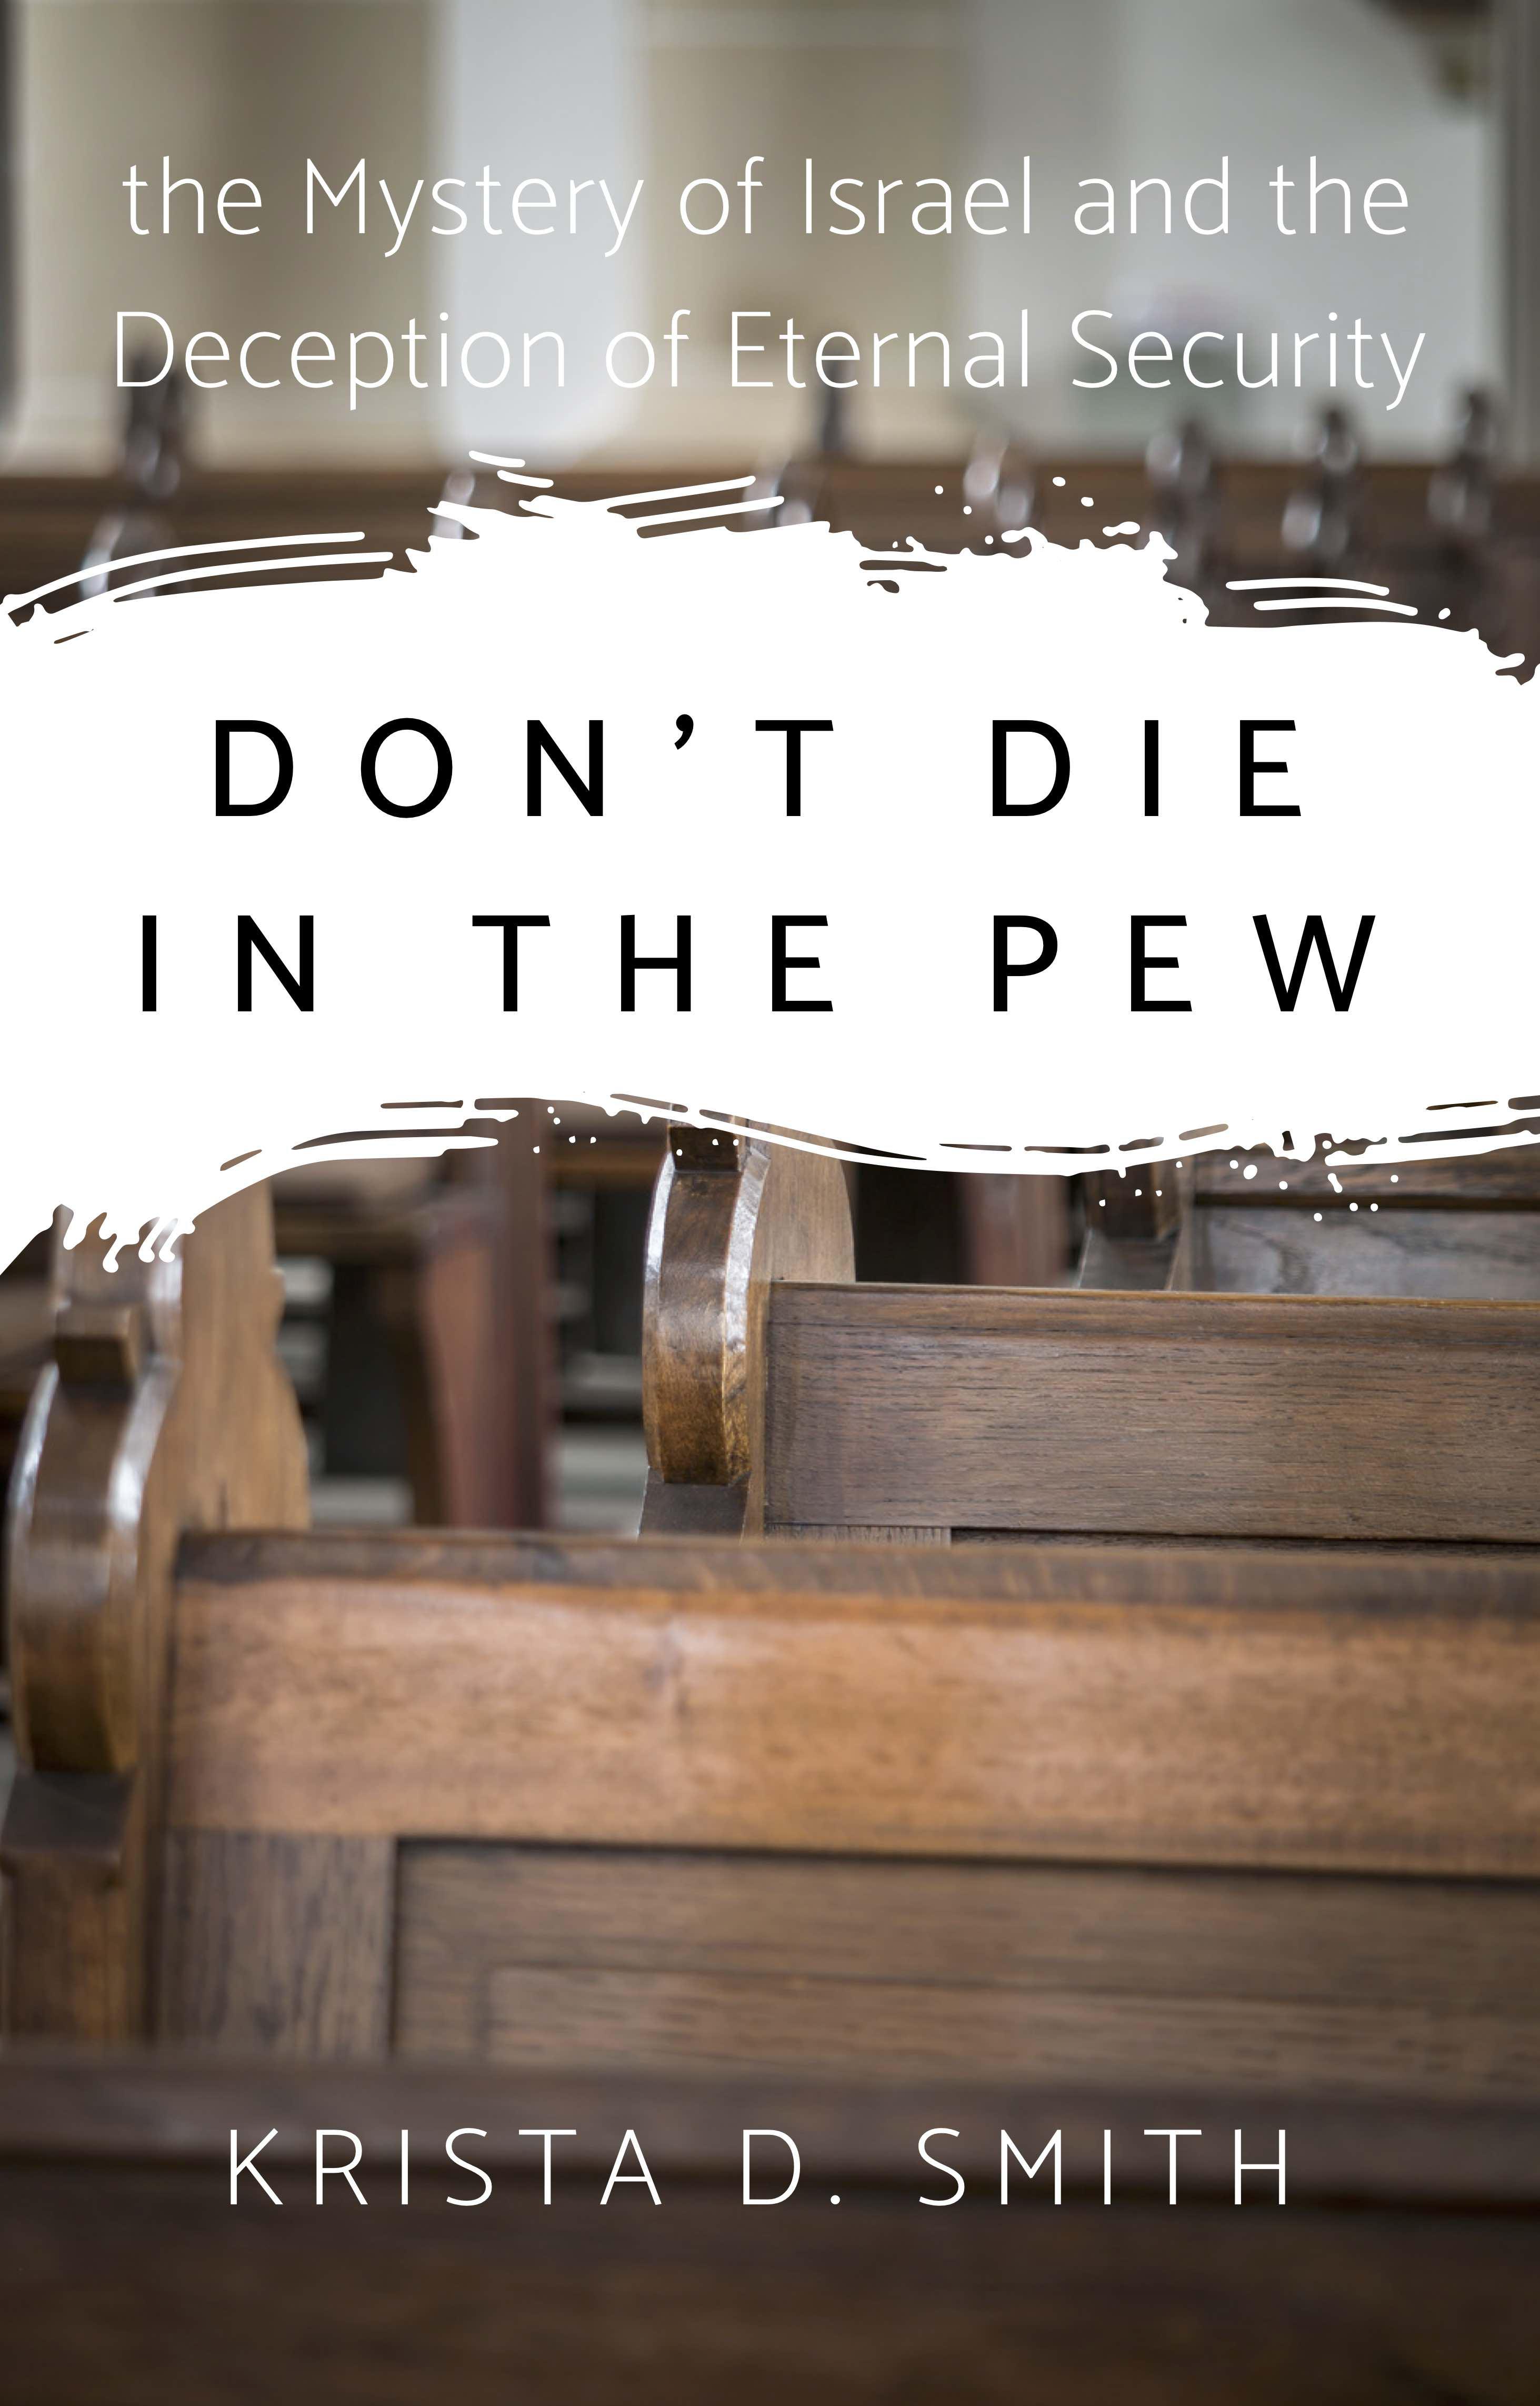 Don't Die in the Pew.com Logo